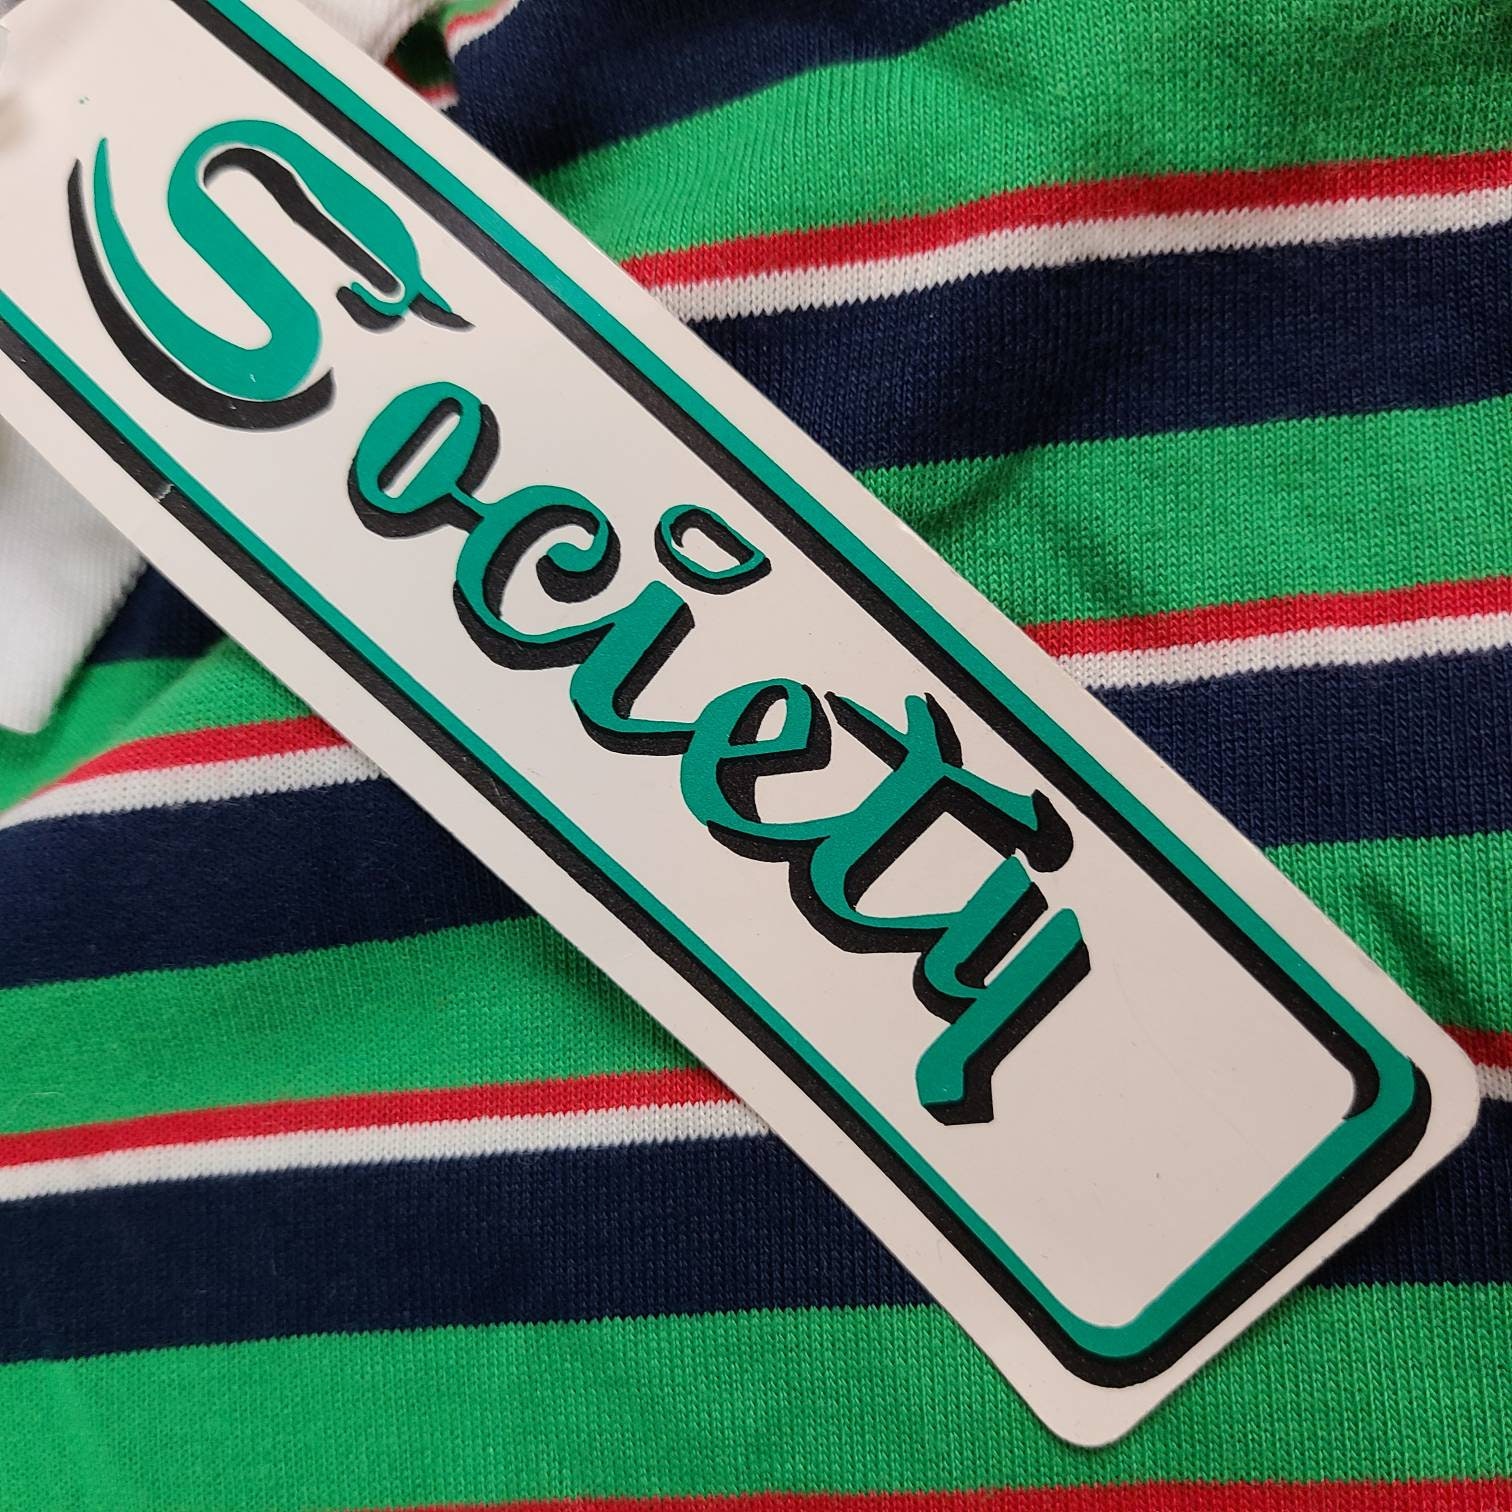 ladies large new old stock NEW green striped new either tags 80s polo Kleding Dameskleding Tops & T-shirts Polos long sleeved 